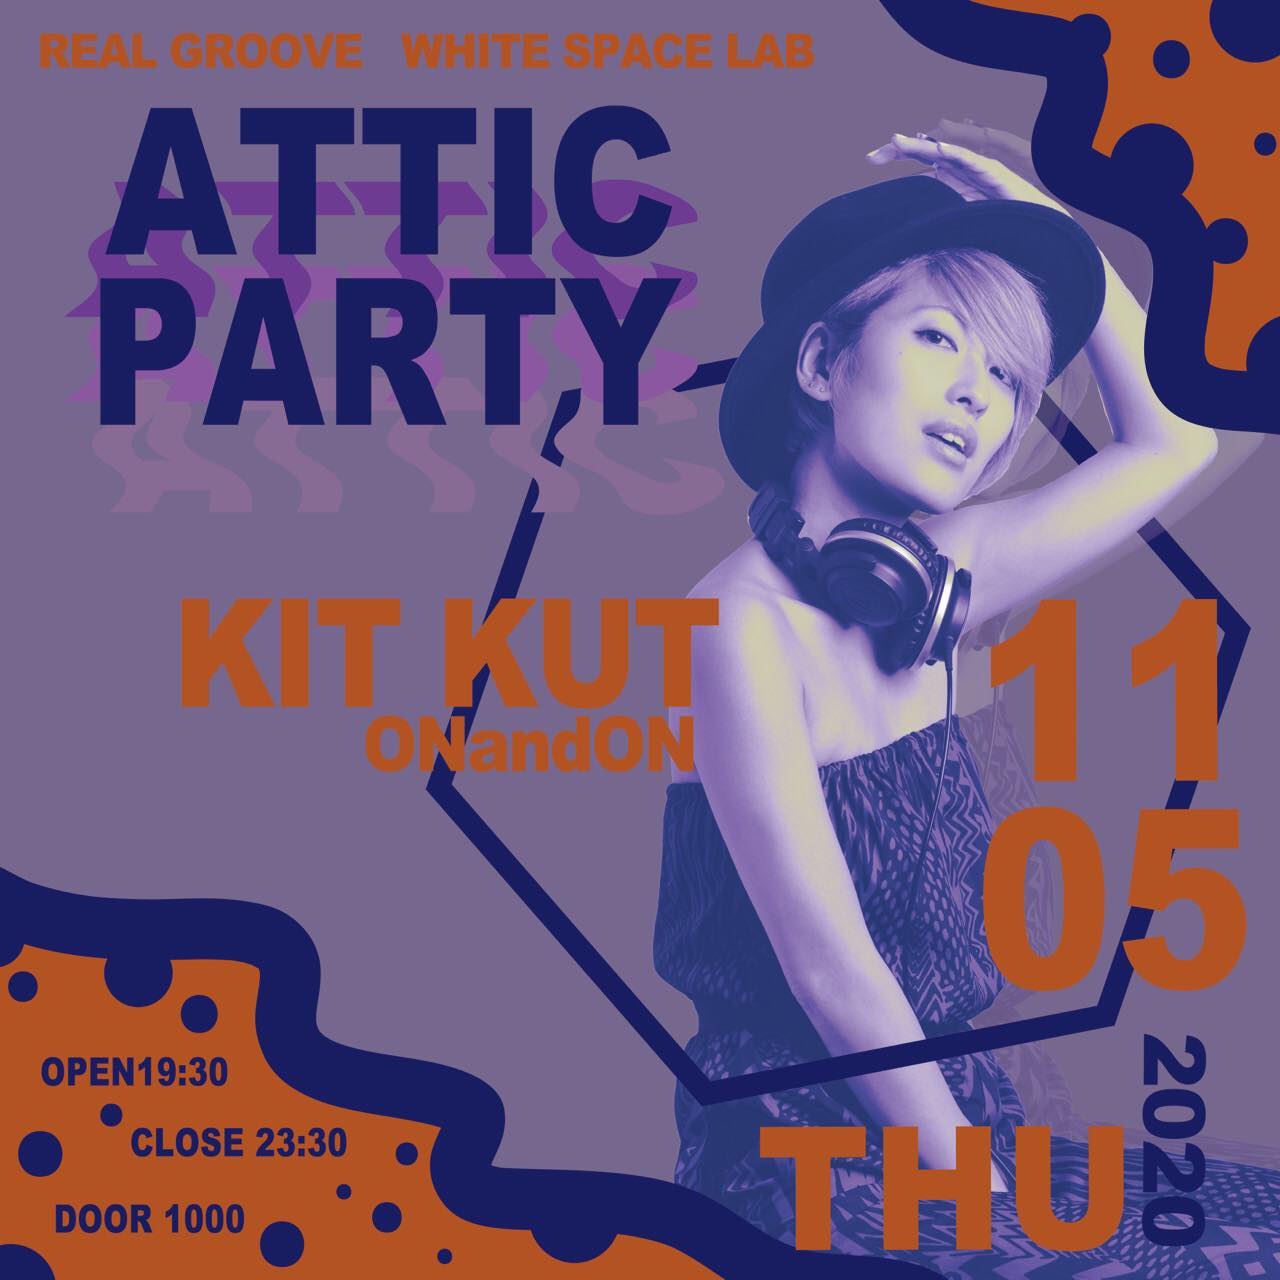 2020/11/5(thr) Real Groove -ATTIC PARTY- @ White Space Lab